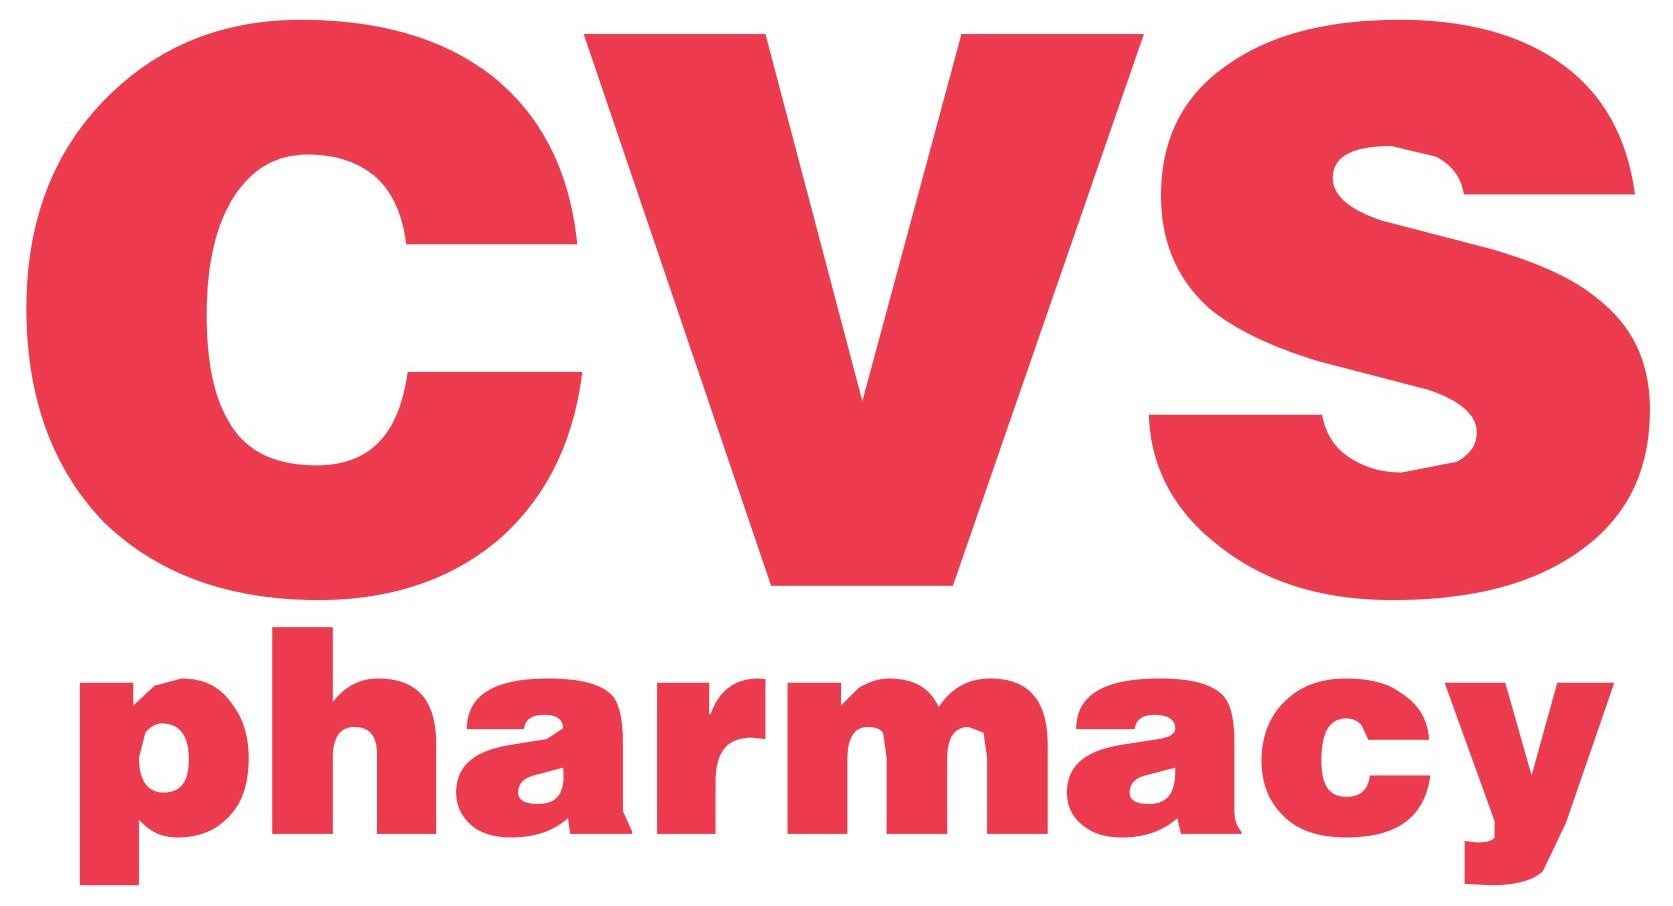 cvs pharmacy logo  pdf  vector icon template clipart free download